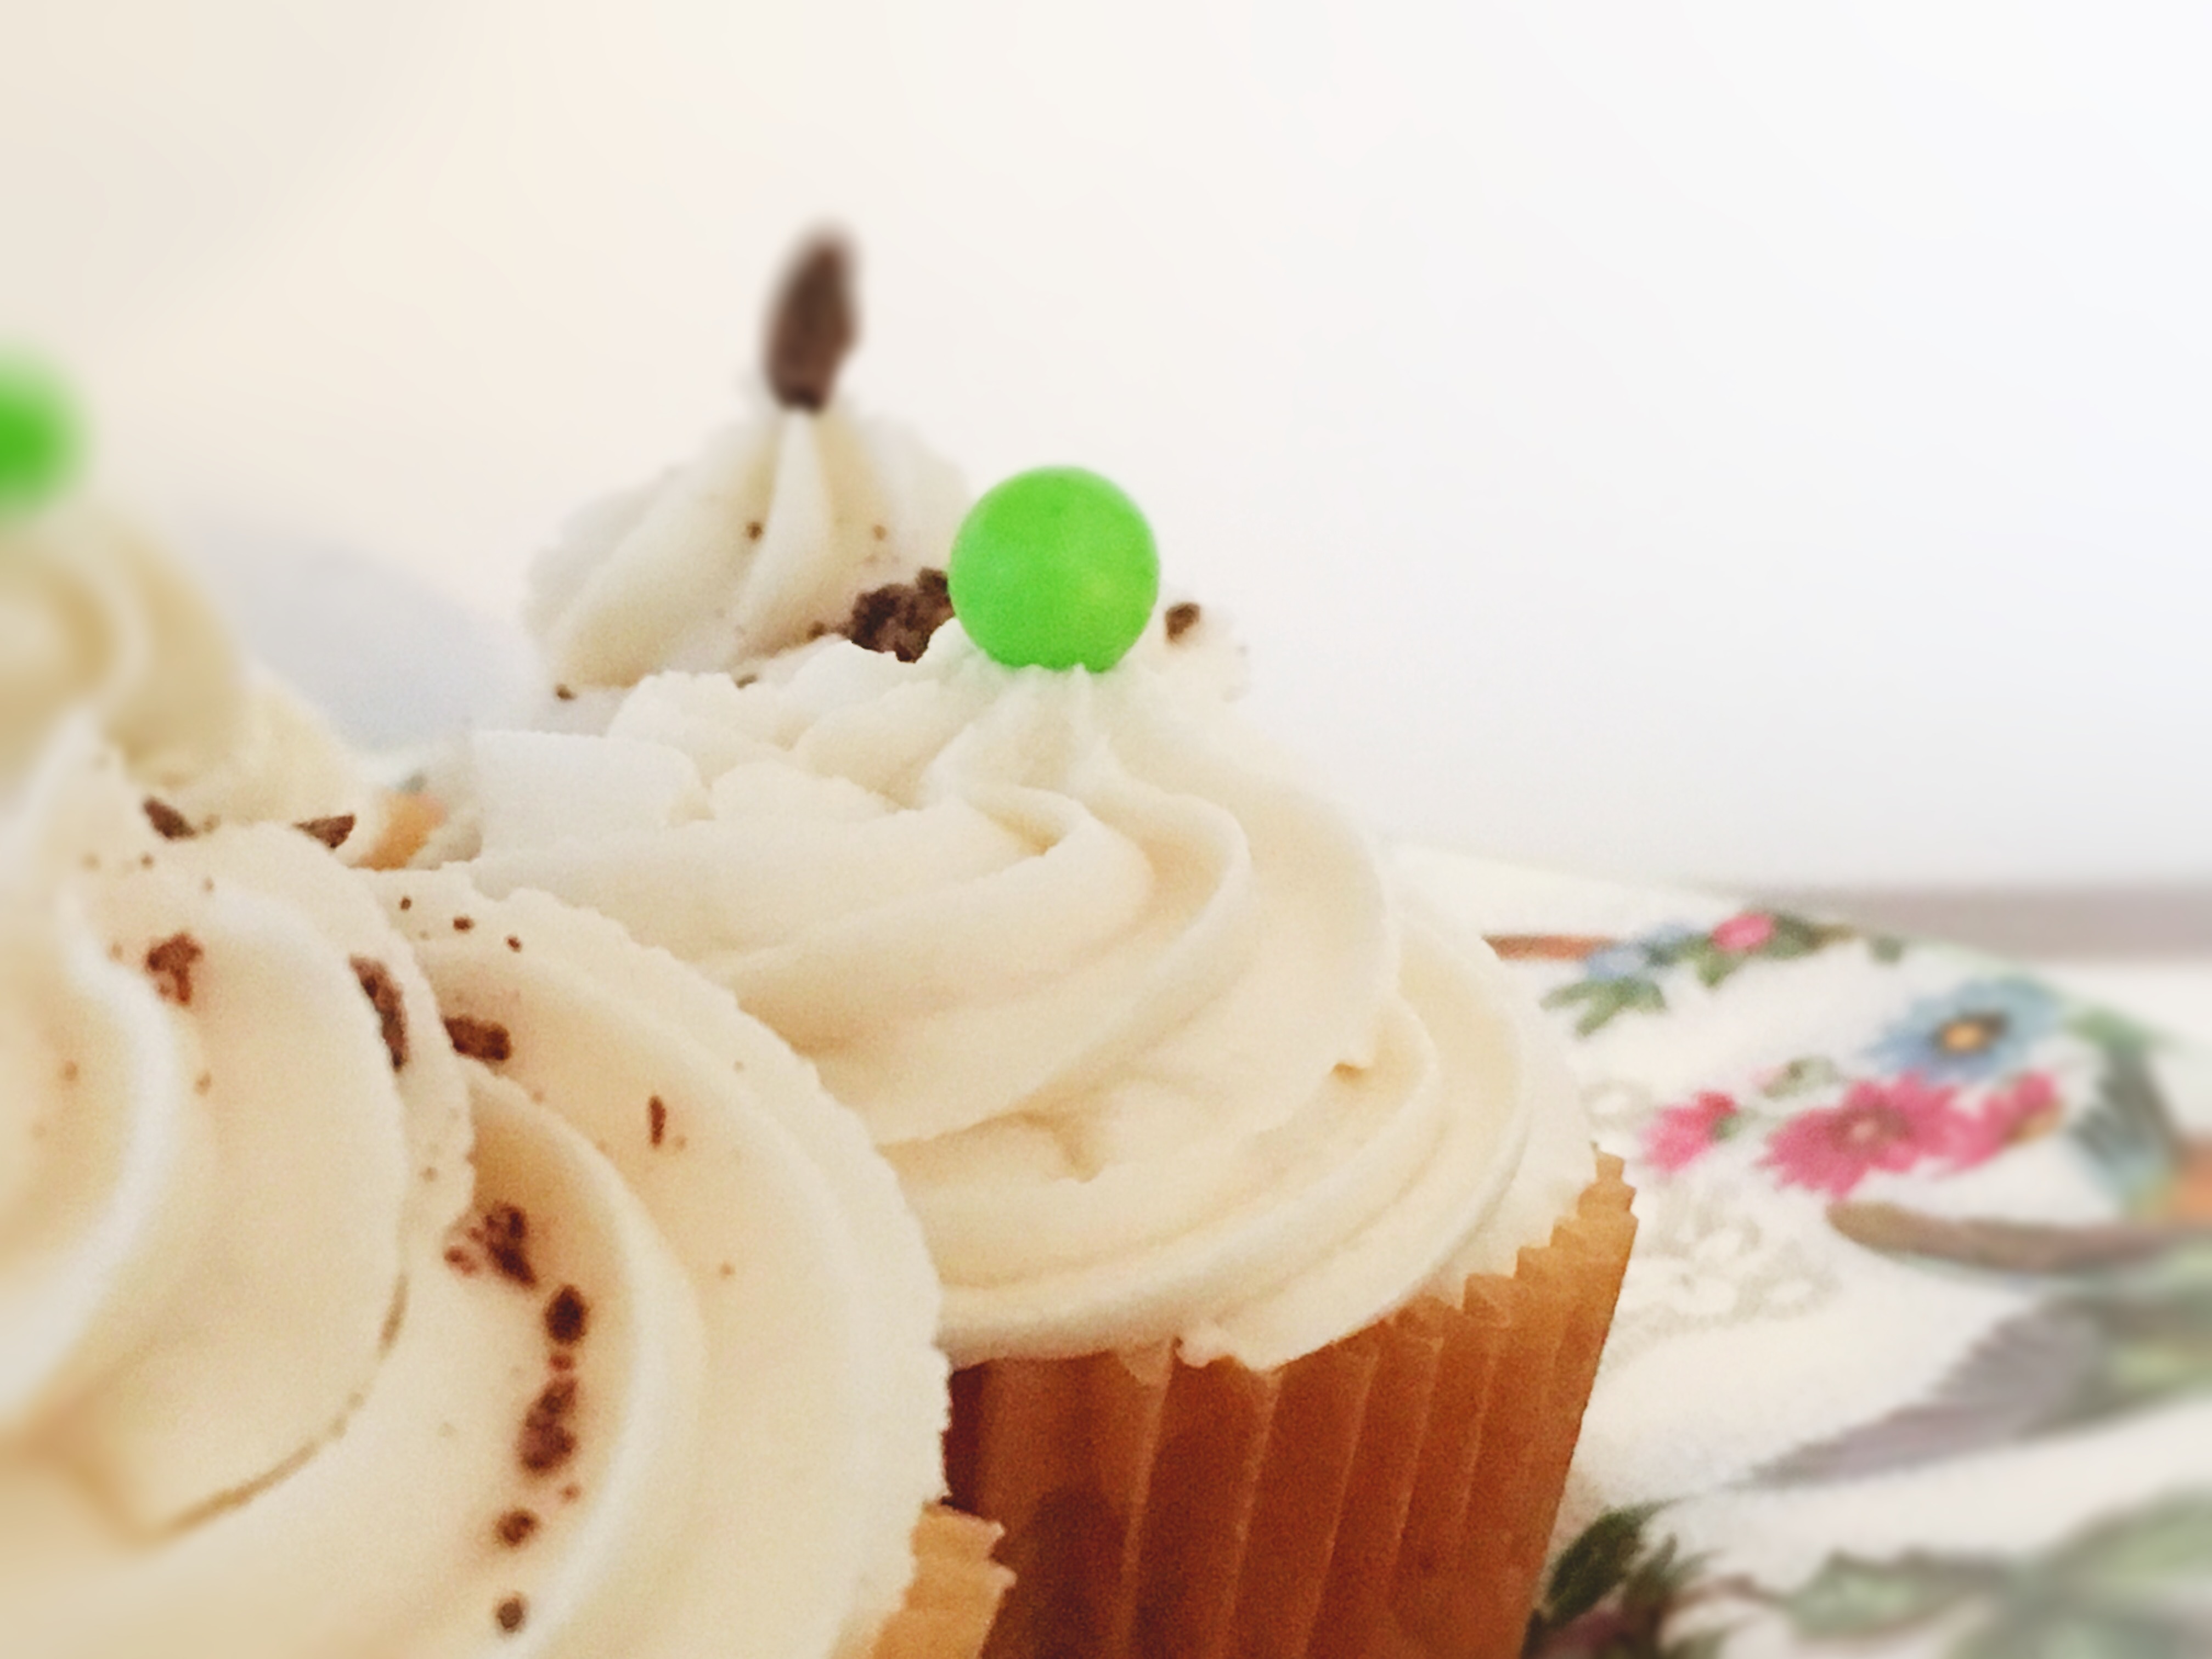 Pear and Chocolate Cupcakes